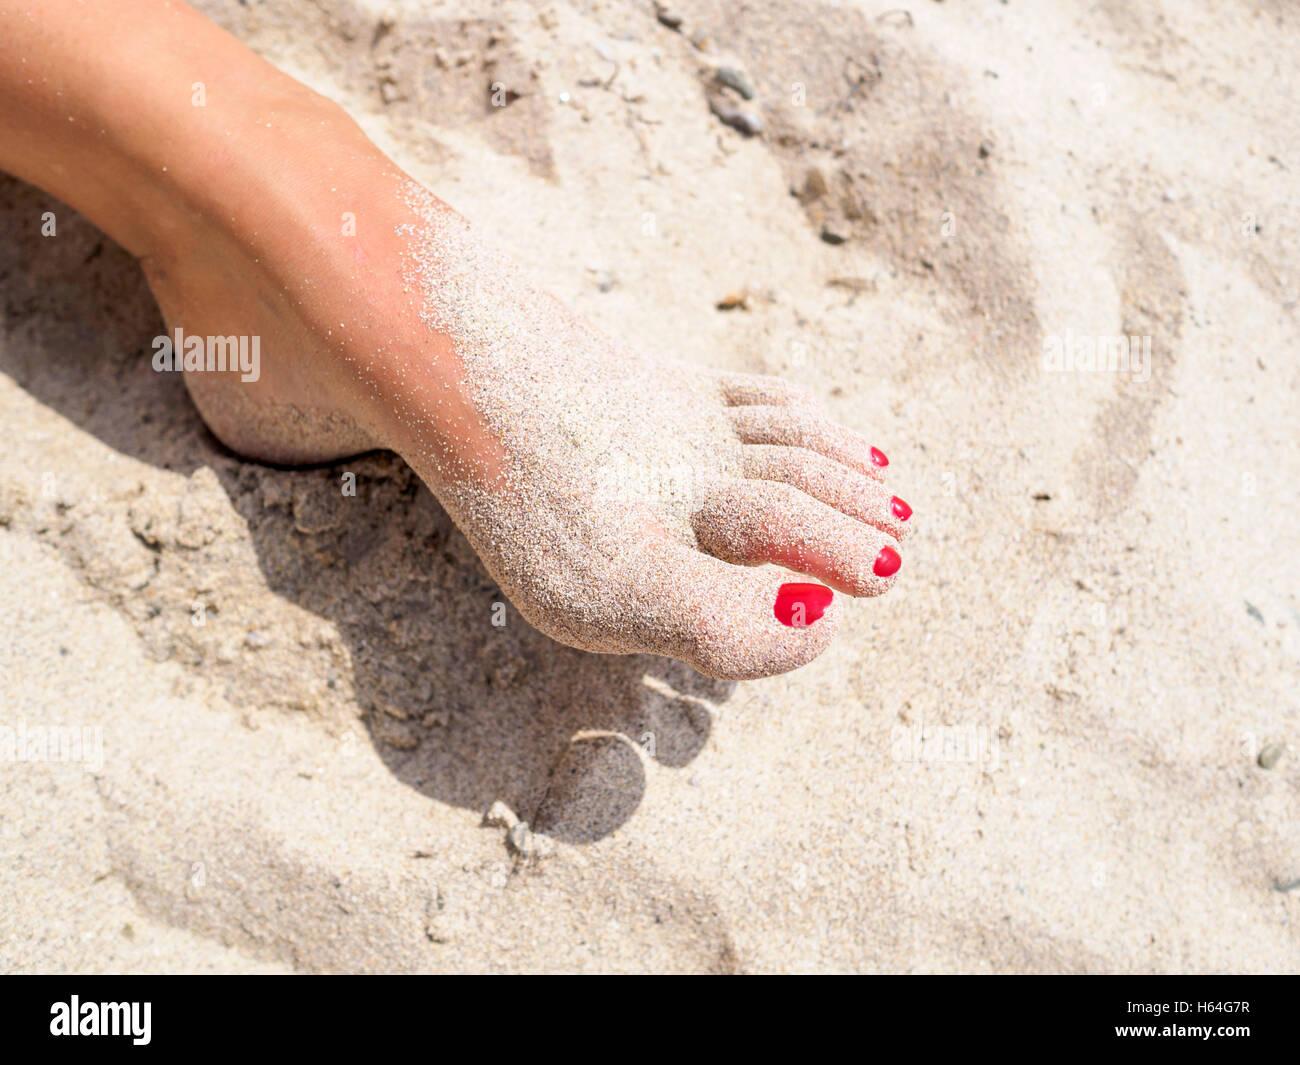 Woman's foot in the sand Stock Photo